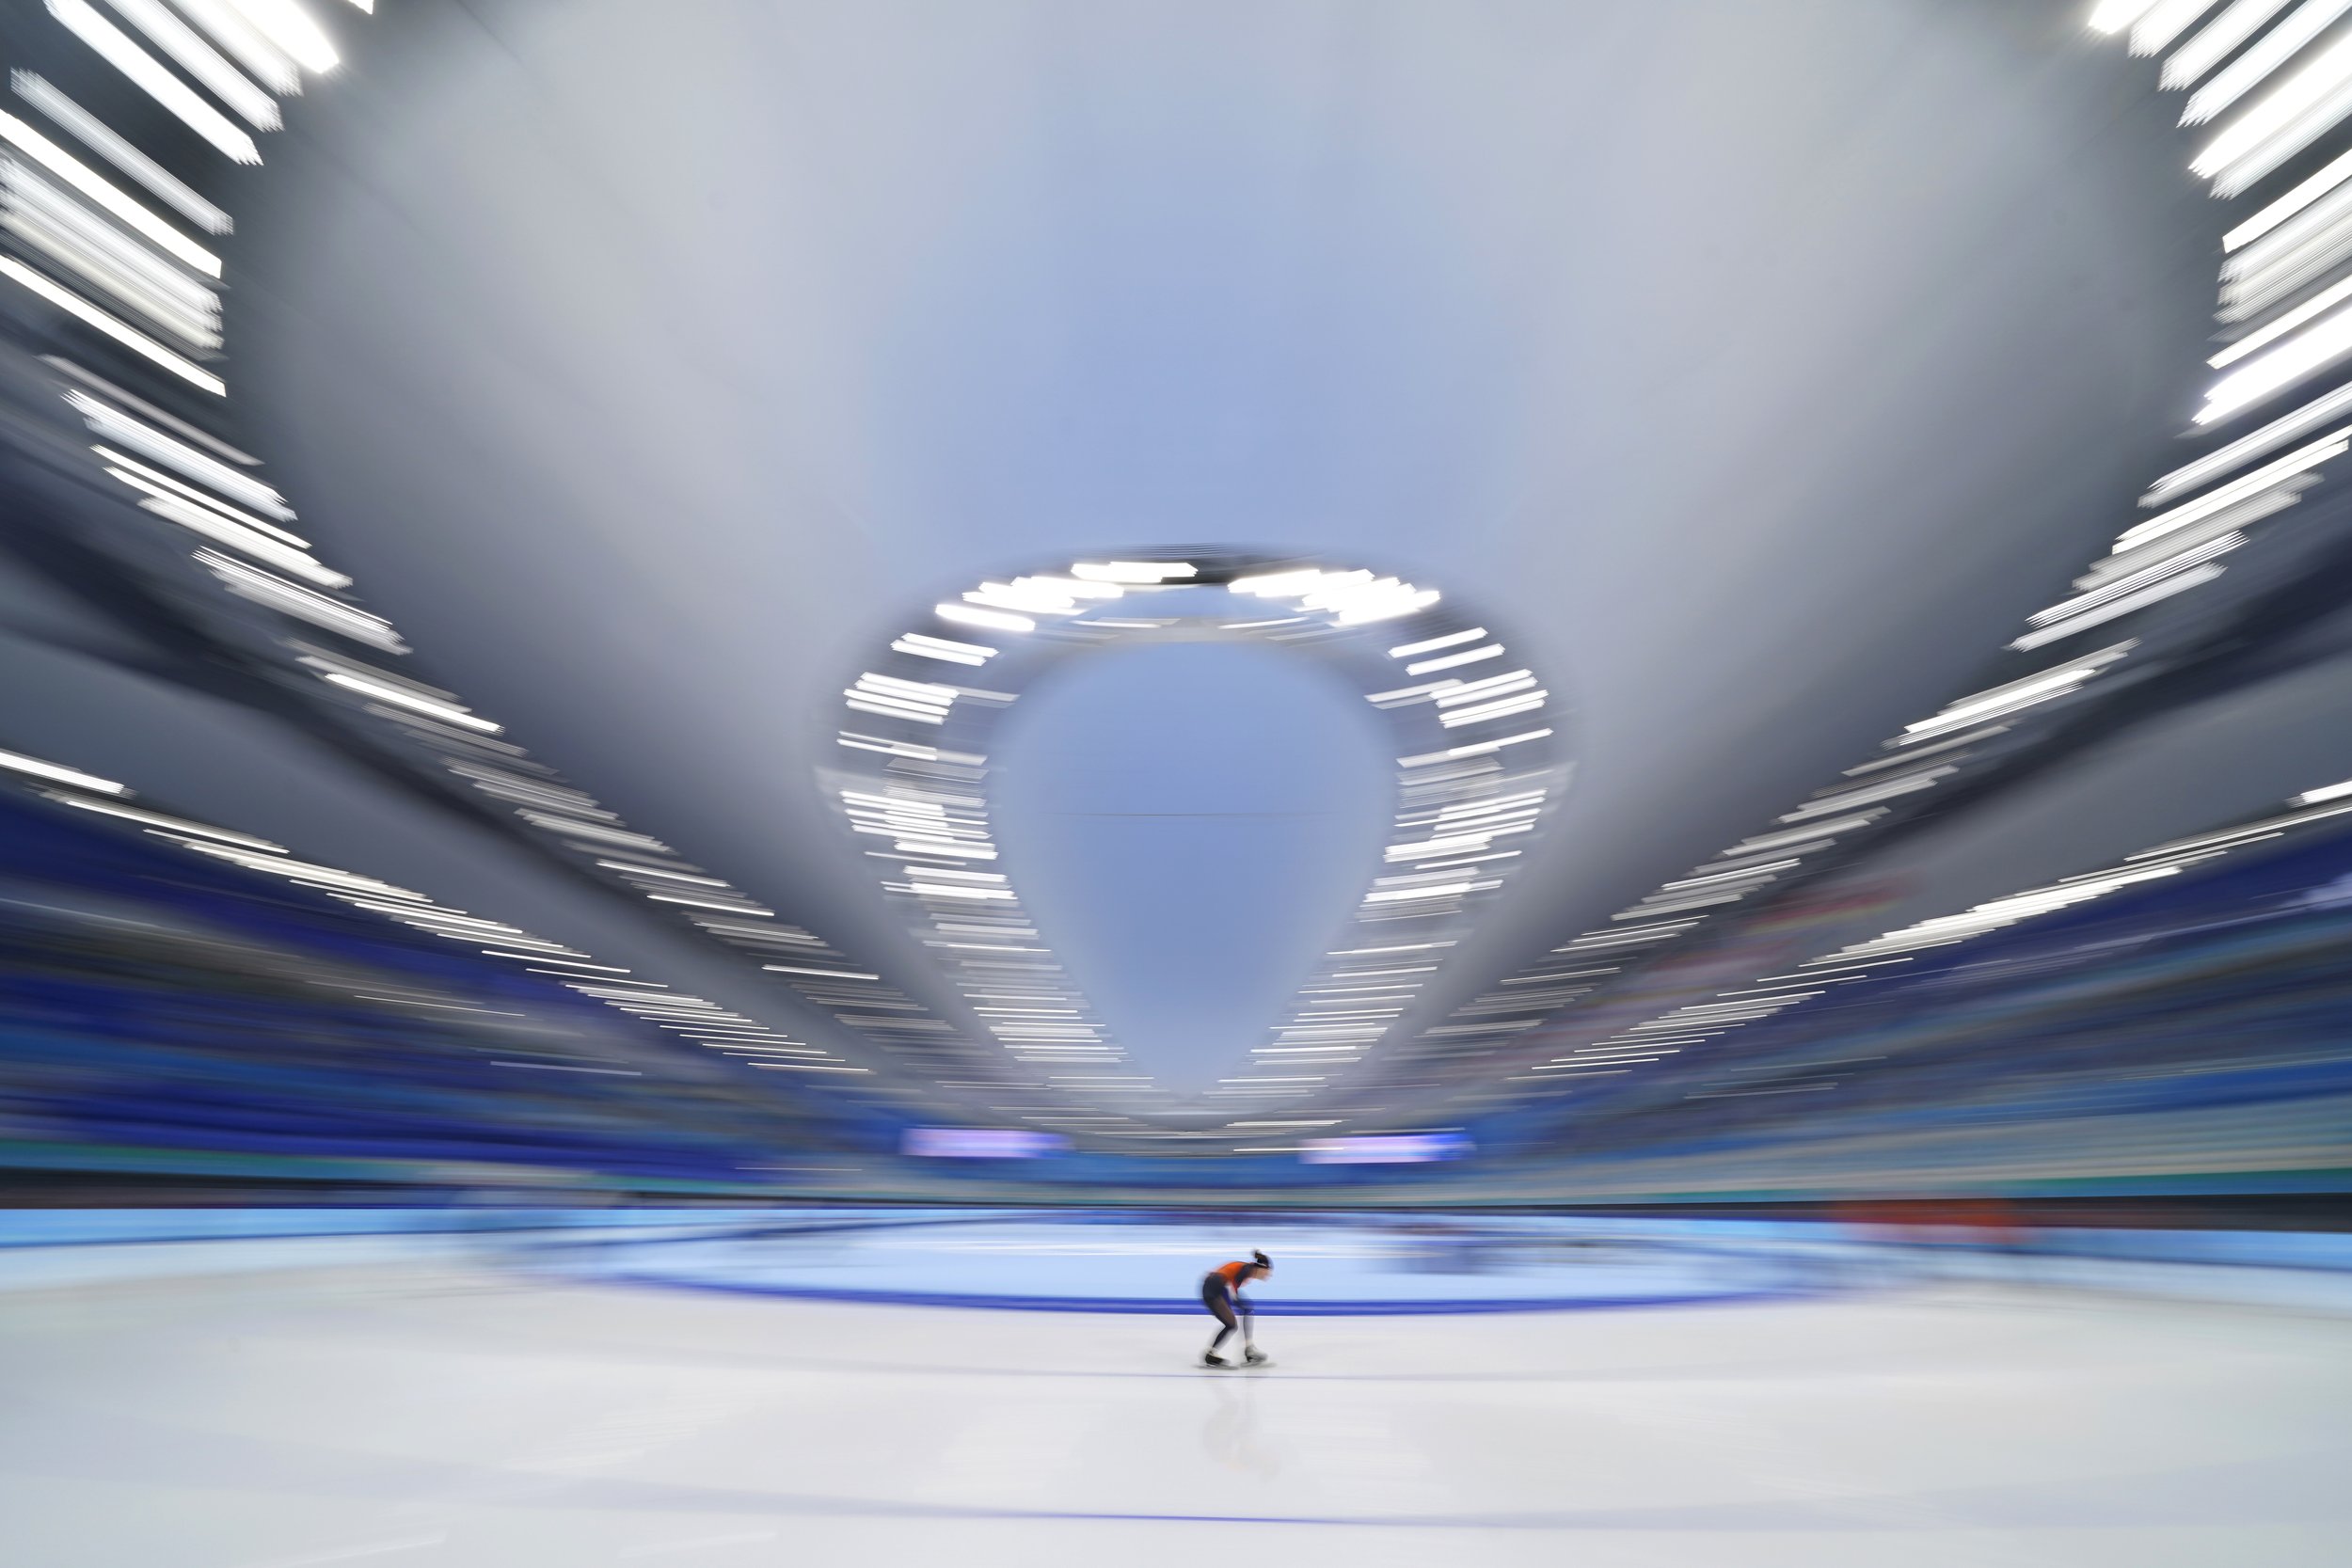  An athlete from the Netherlands skates during a speed skating practice session ahead of the 2022 Winter Olympics, Feb. 3, 2022, in Beijing. (AP Photo/Ashley Landis) 